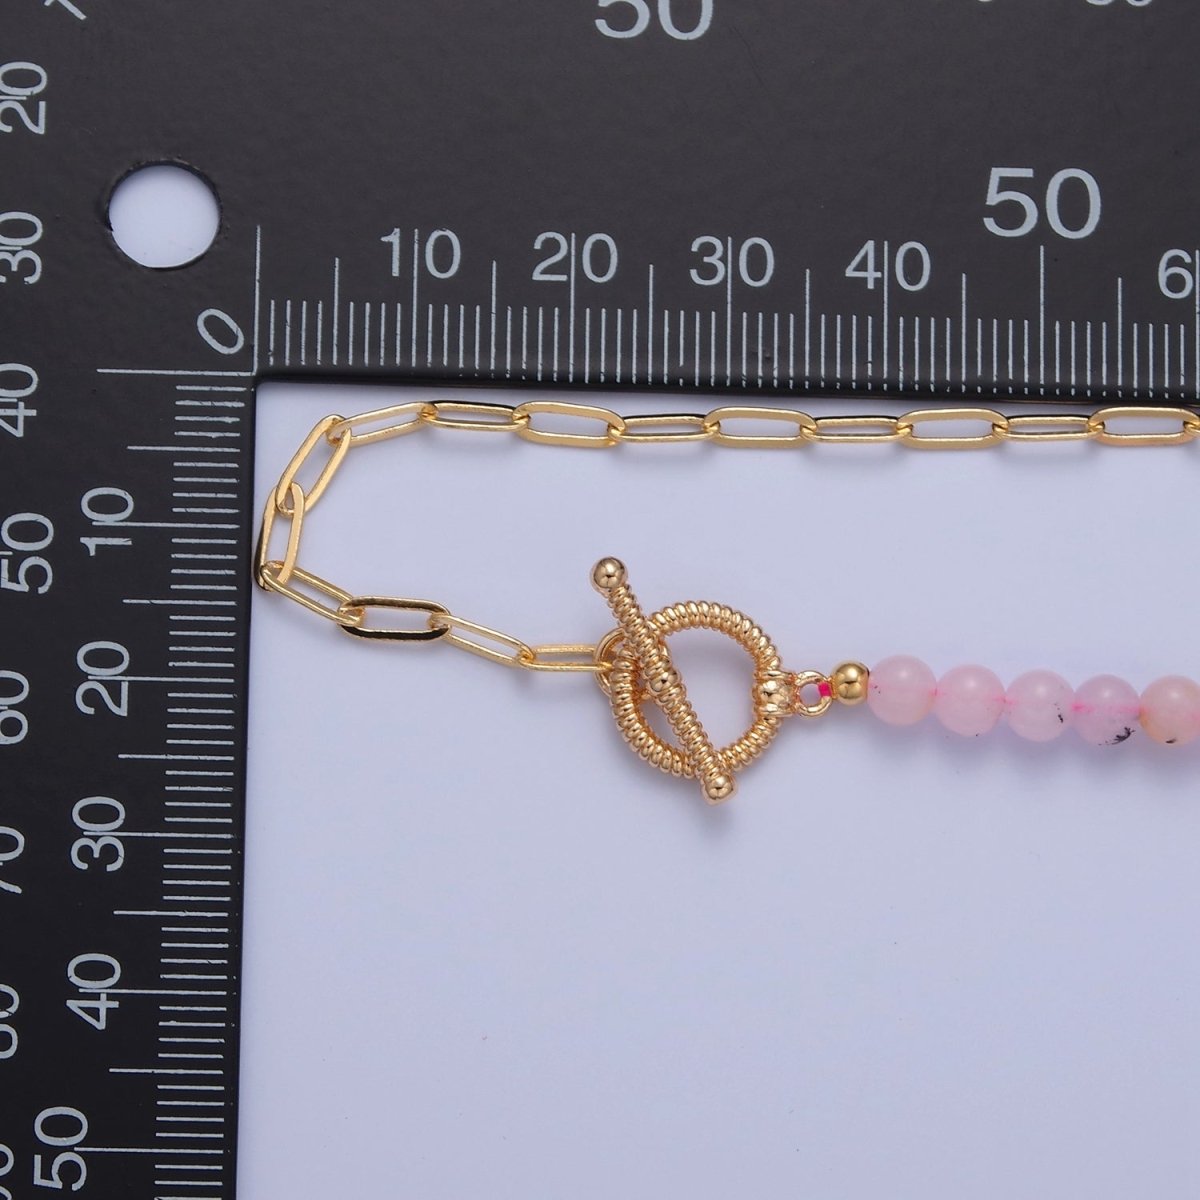 Dainty Half Bead Half Link Chain Necklace, 24k Gold Filled Paperclip Chain with Pink Jade Necklace Toggle Clasp | WA-970 Clearance Pricing - DLUXCA